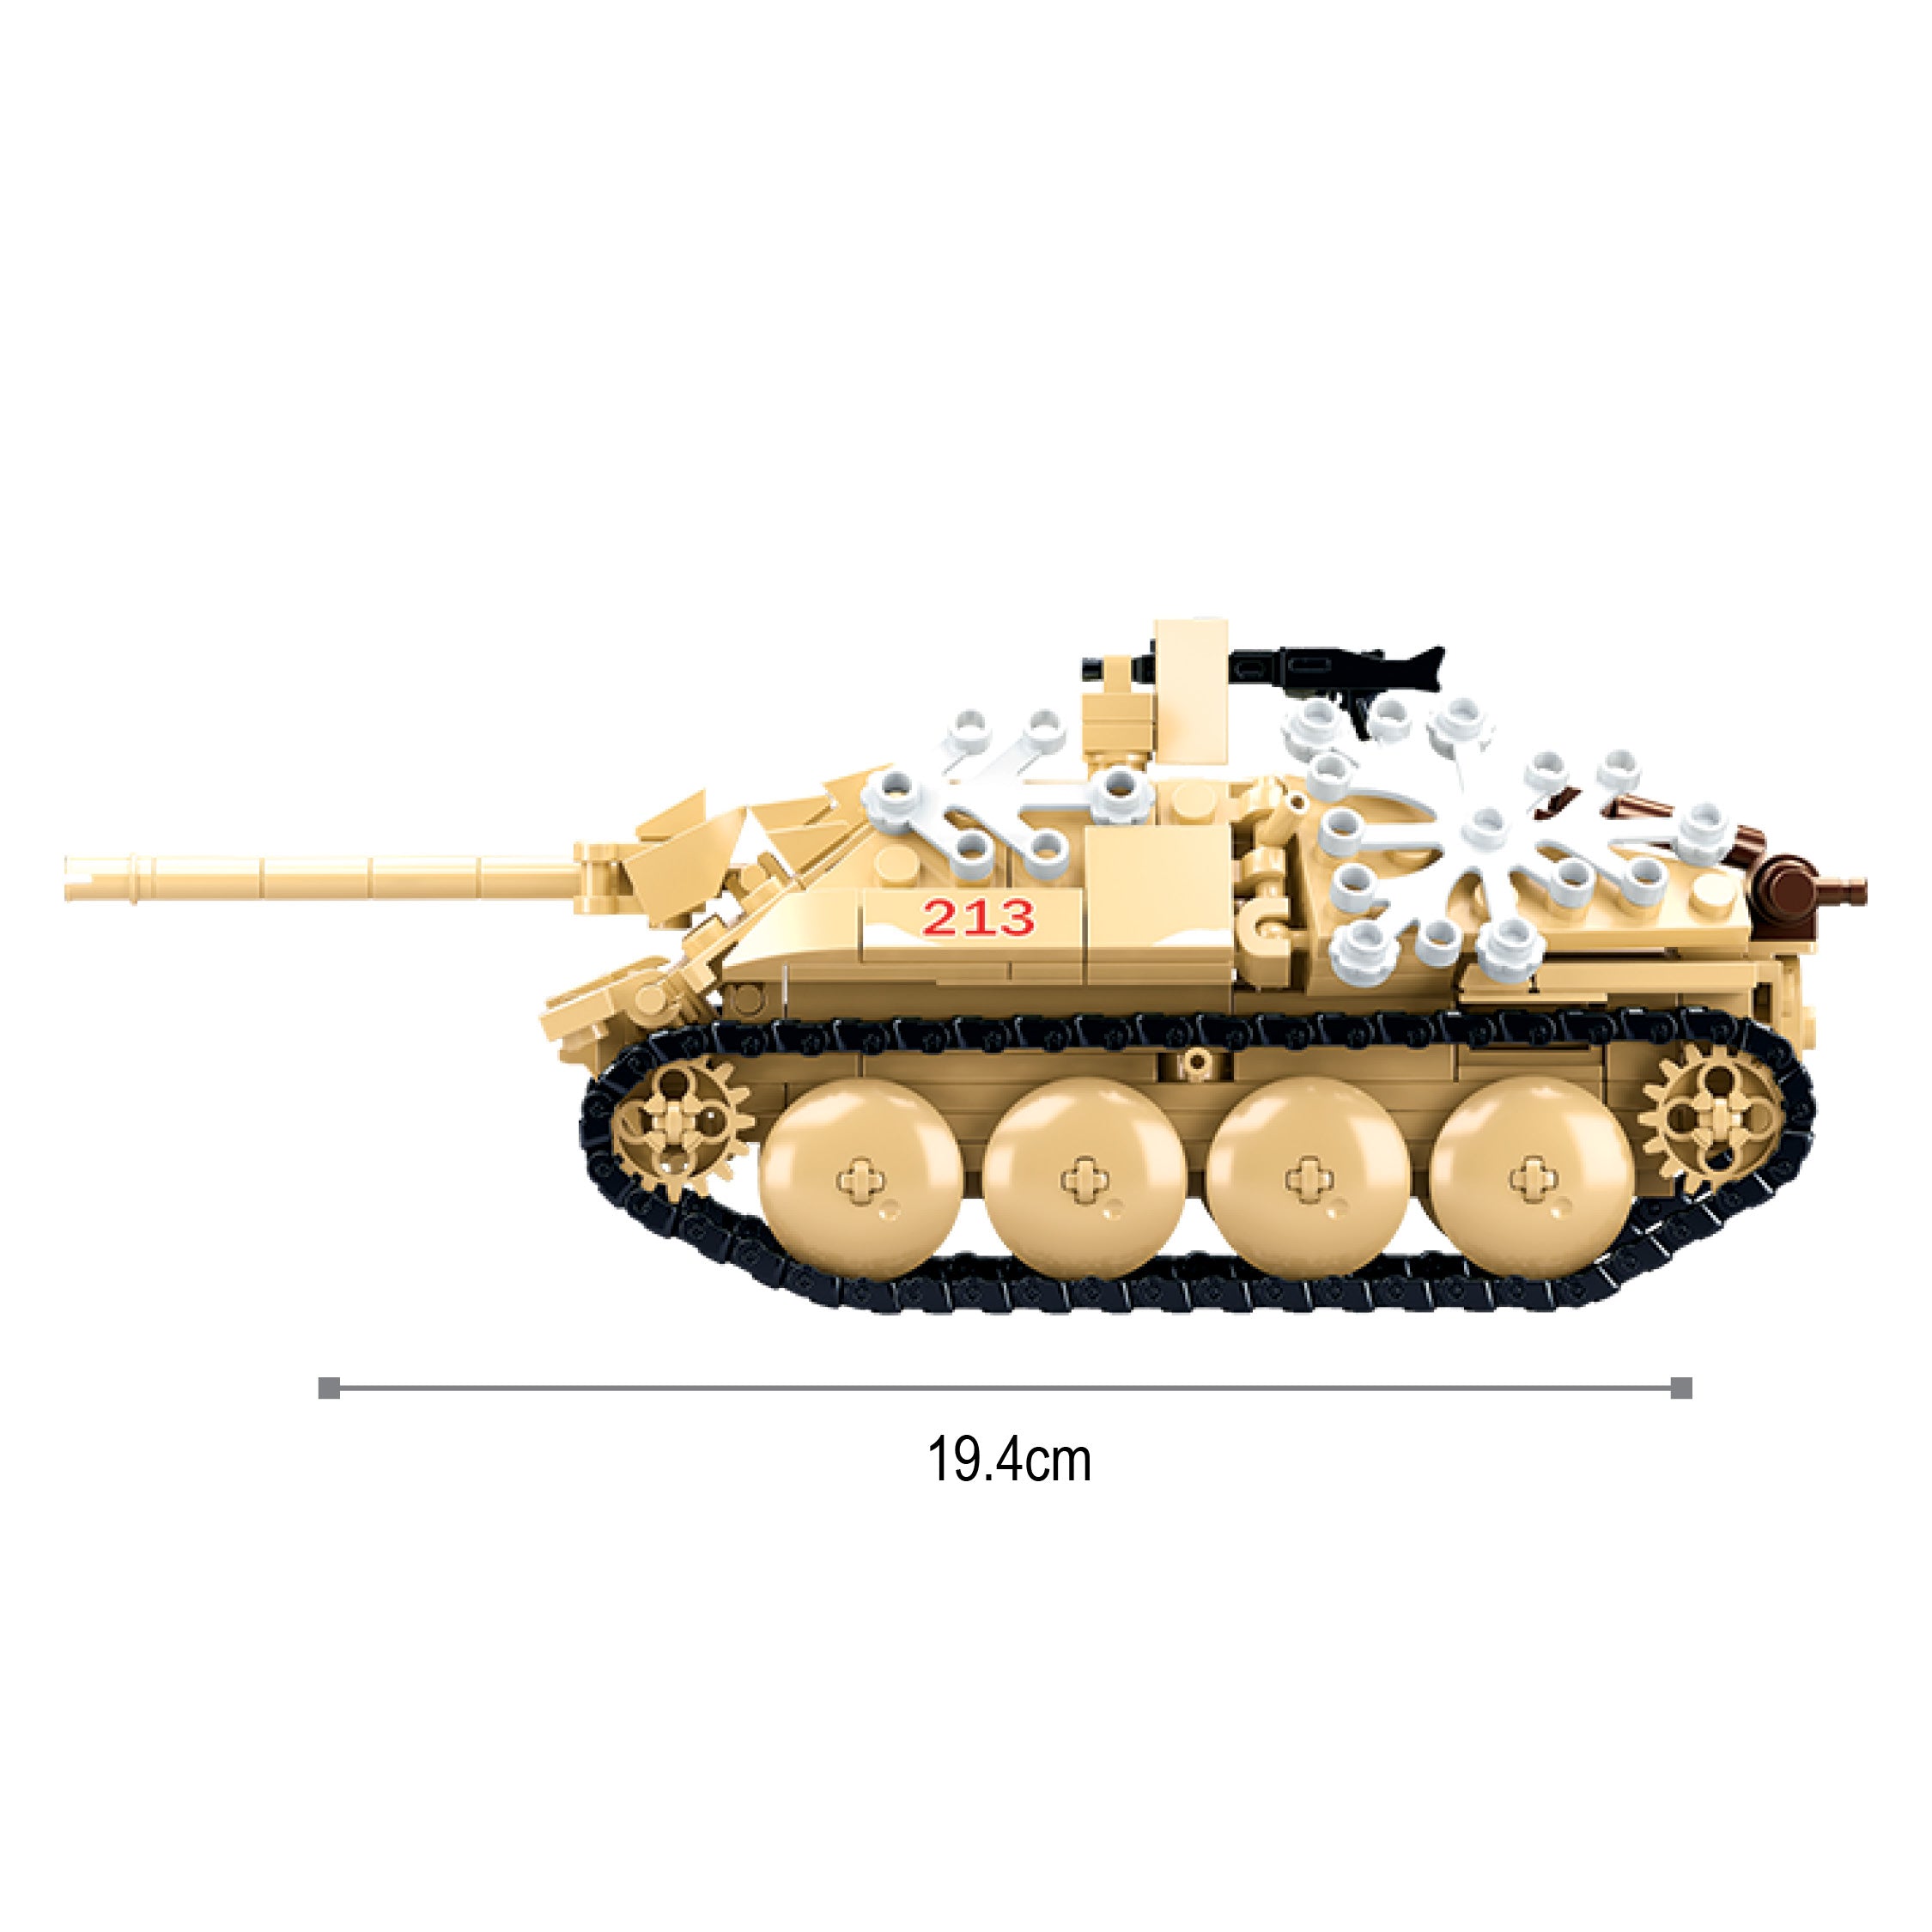 Sluban® Army Battle Of Budapest Tank Destroyer (M38-B976) (344 Pcs) Building Blocks Kit For Boys Aged 6 Years And Above Creative Construction Set Educational Stem Toy  Blocks Compatible With Other Leading Brands, Bis Certified.